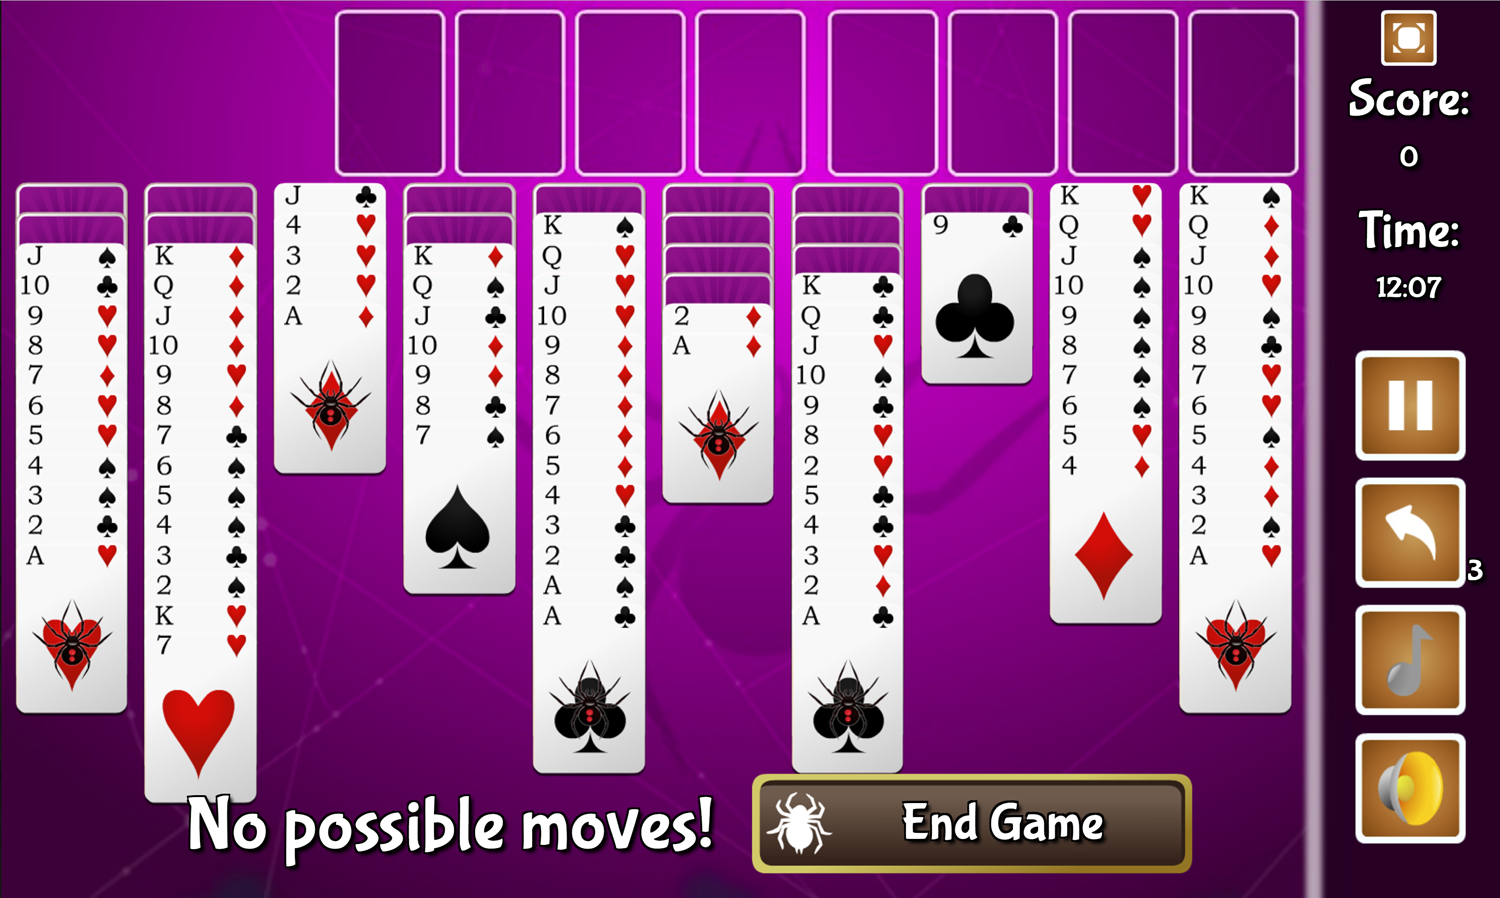 Black Widow Solitaire Game No Possible Moves Screenshot.